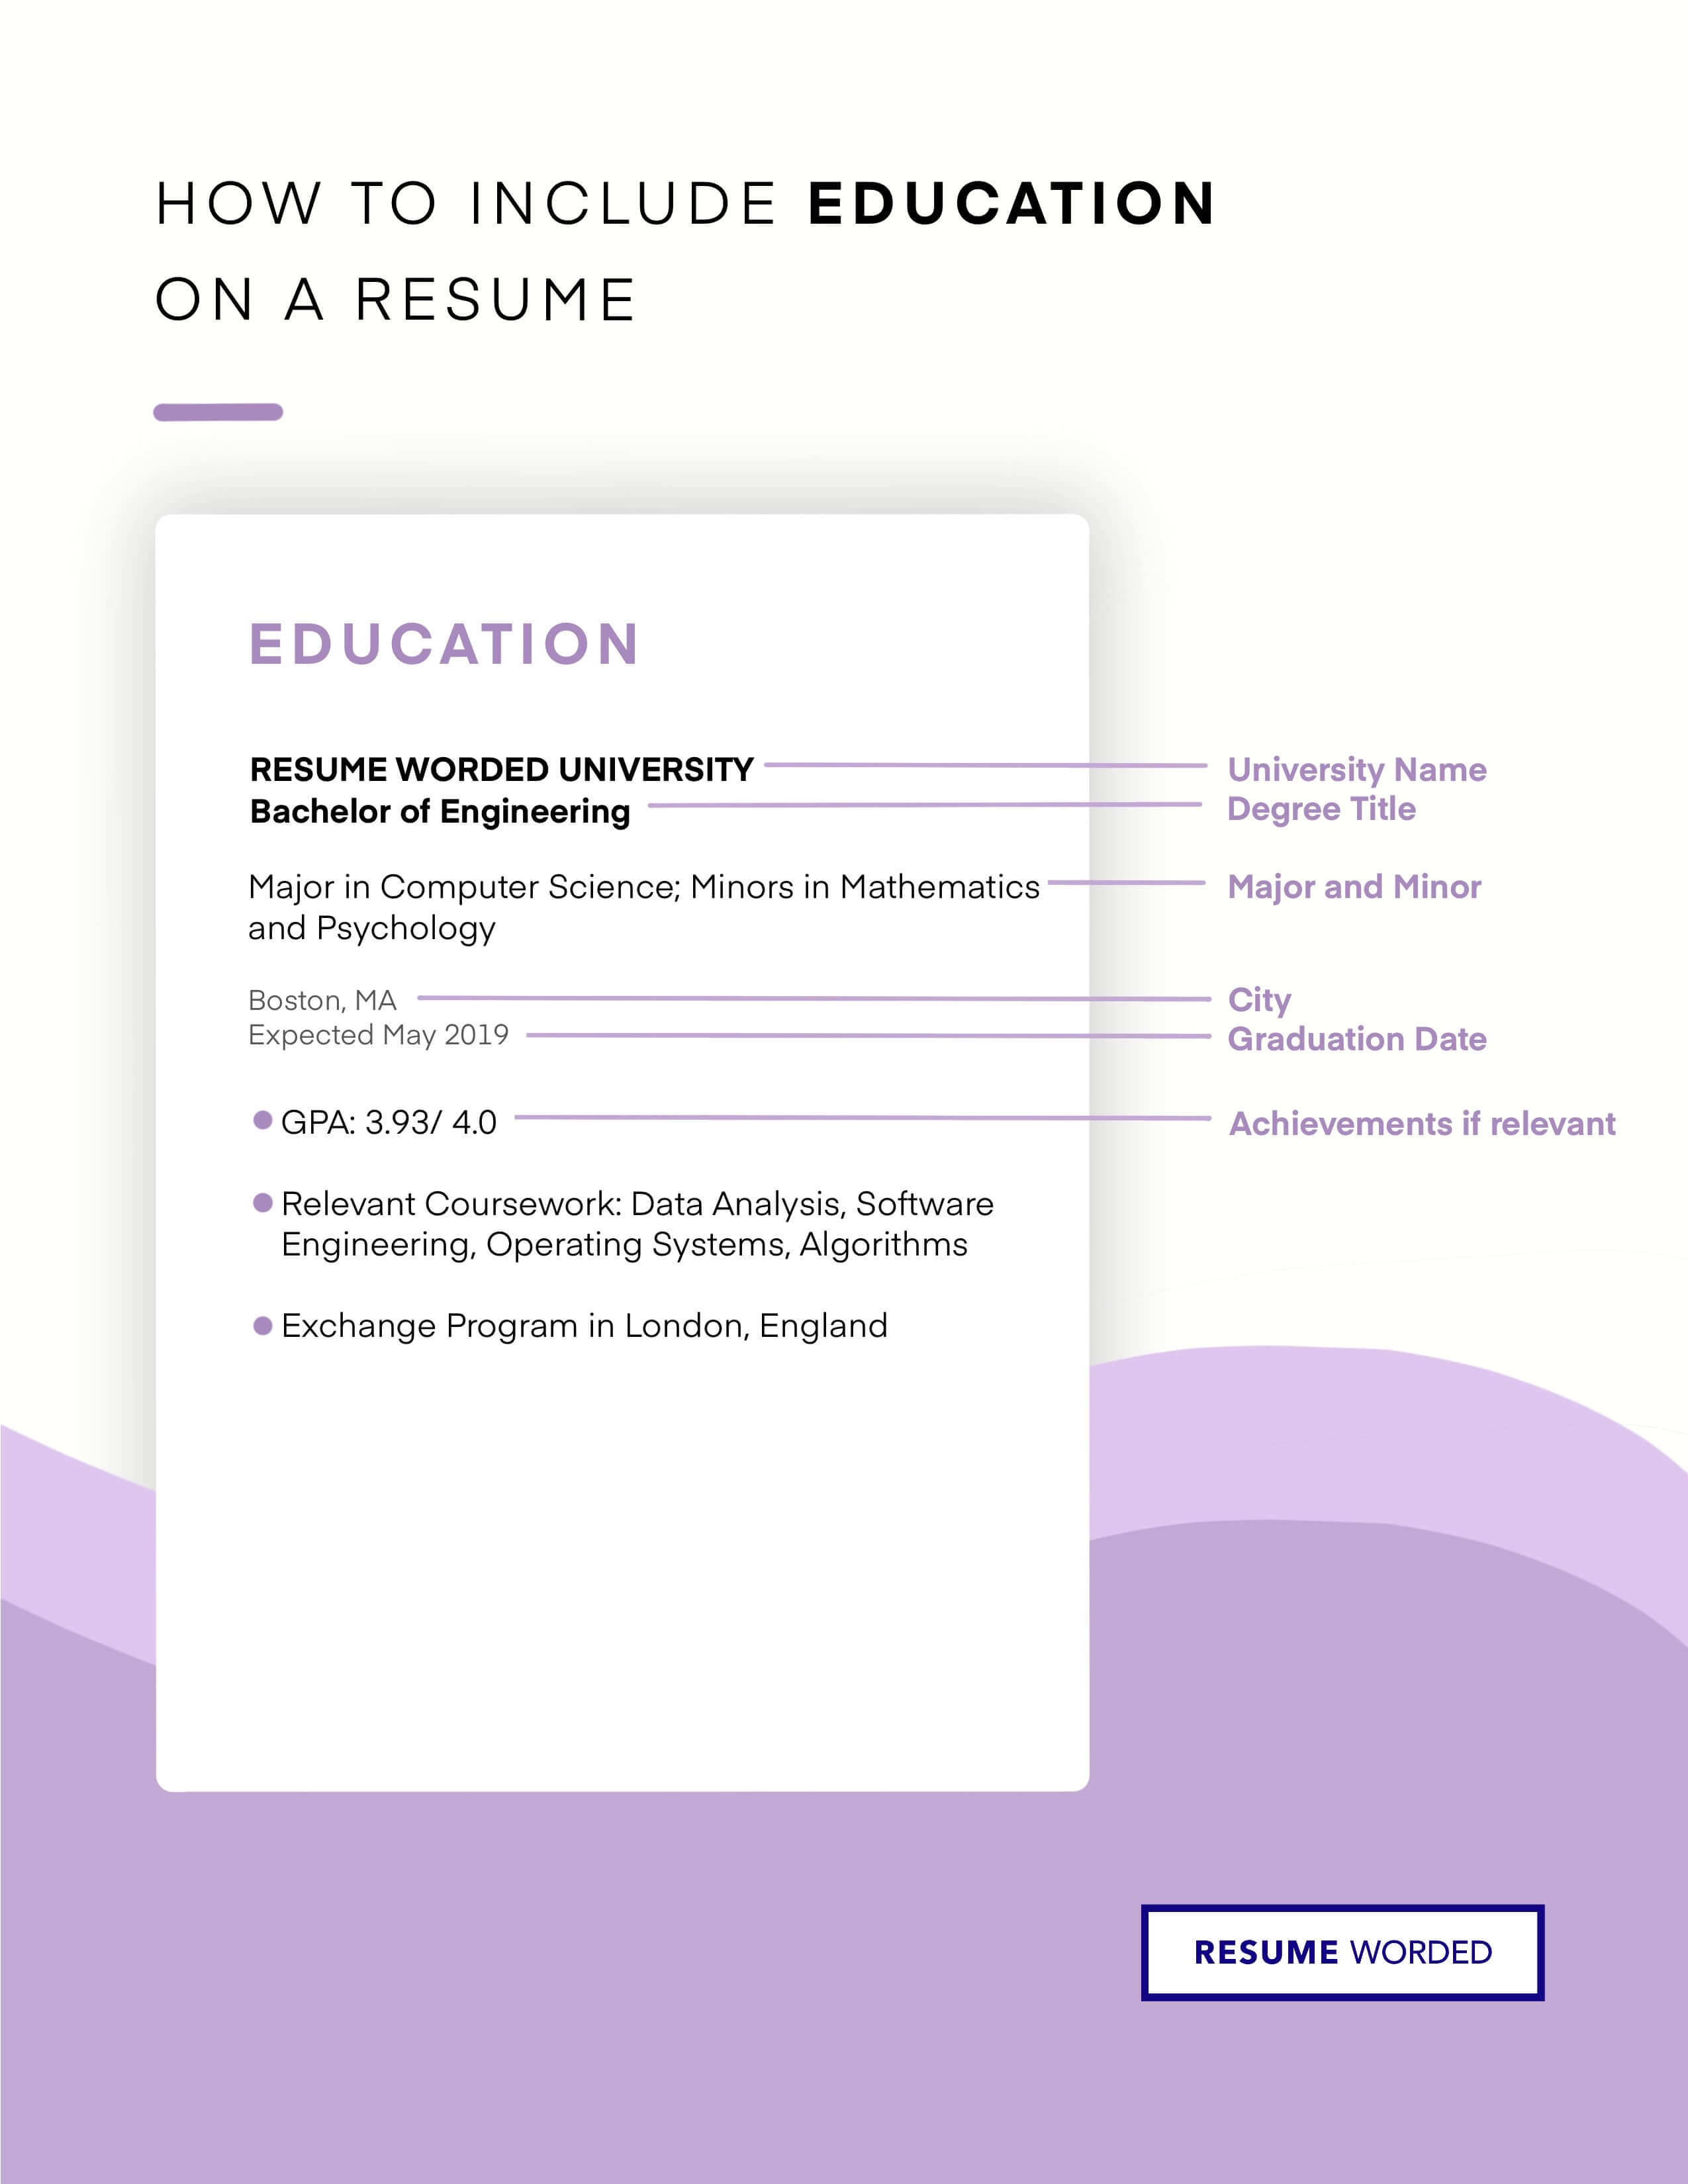 Emphasize your Education section by listing it first - Entry Level Account Manager Resume